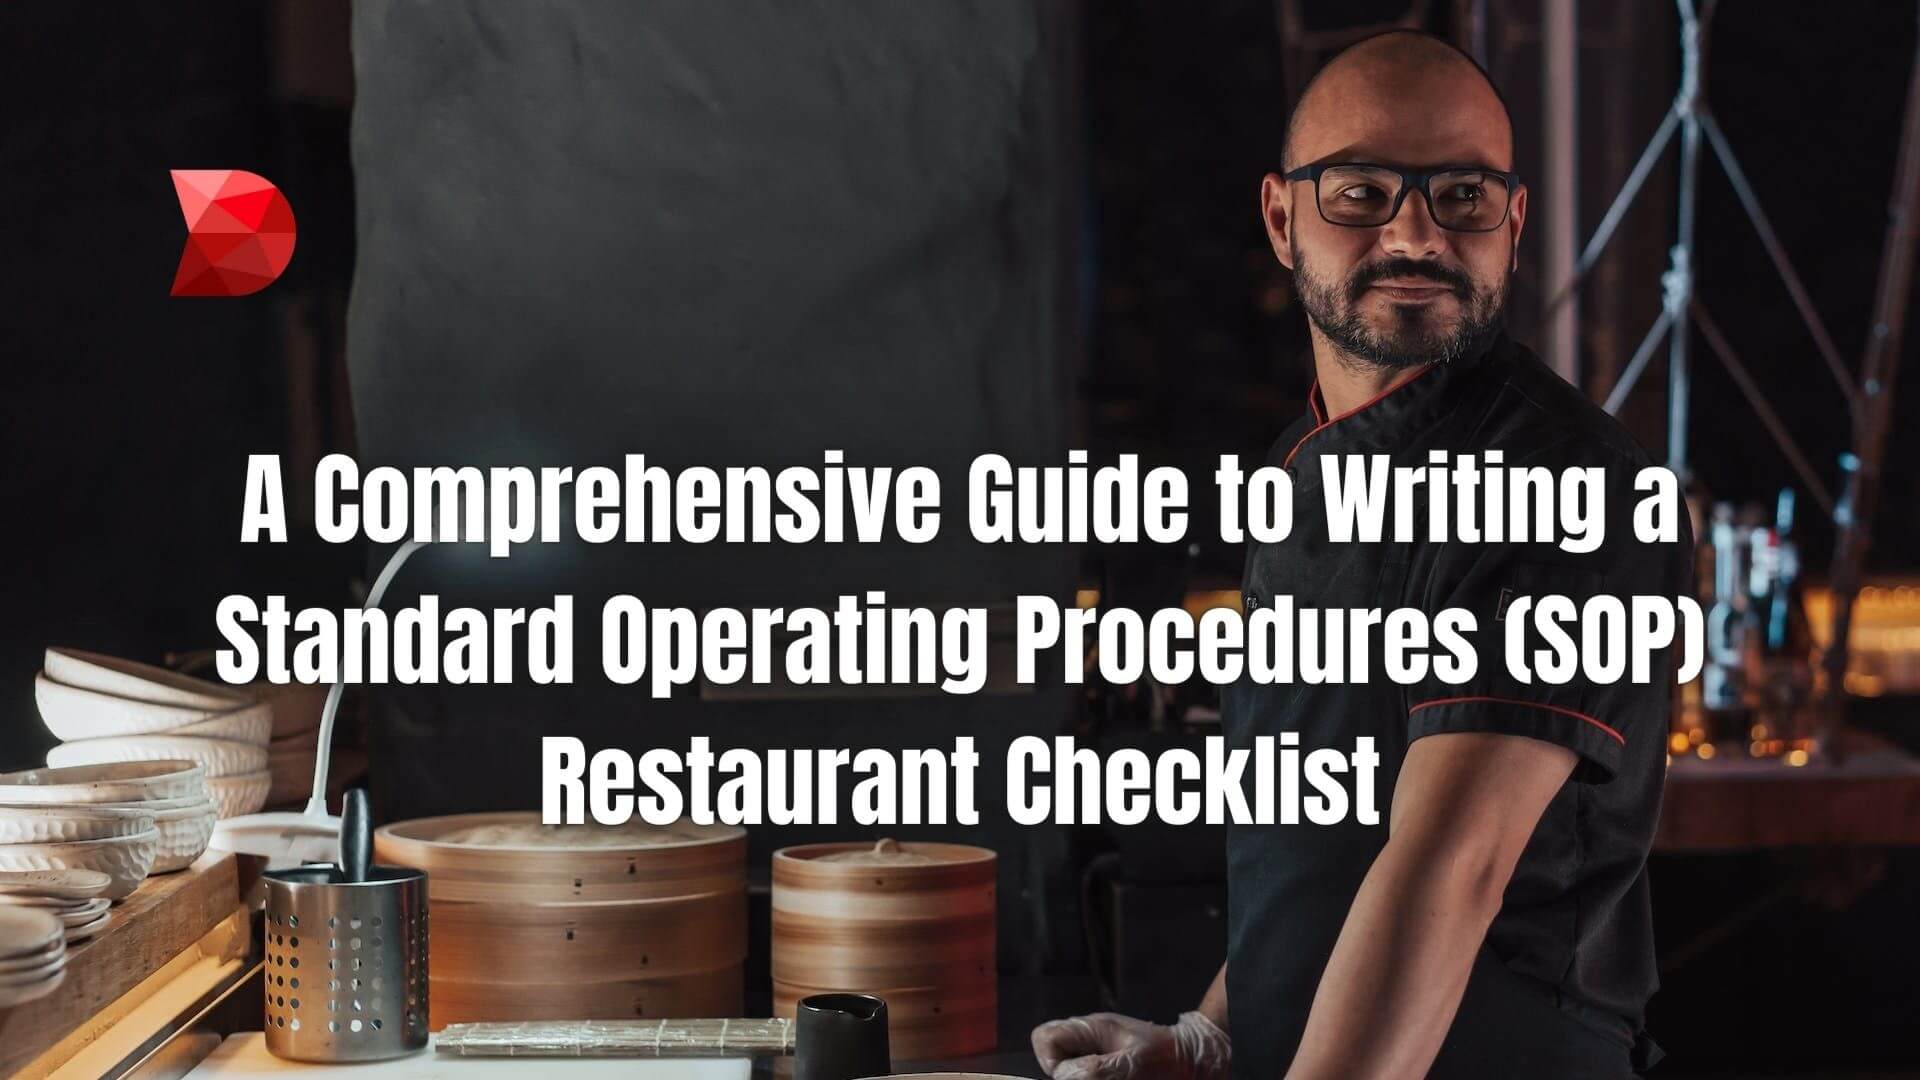 Unlock restaurant success with our standard operating procedures checklist guide. Click here to learn how to write one for your business.